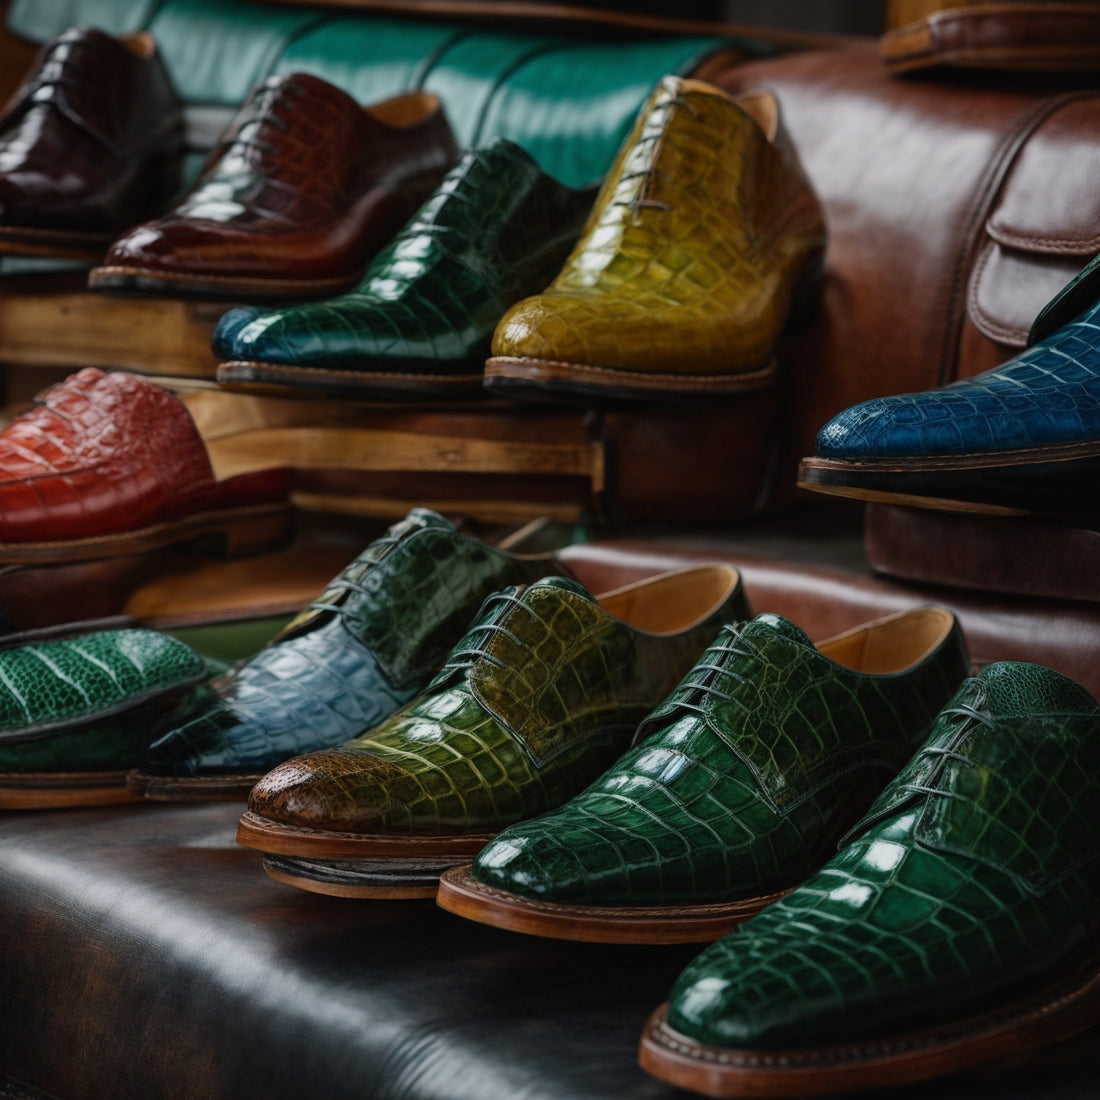 Exquisite Comfort: Handcrafted Alligator Leather Shoes - A Luxurious Investment